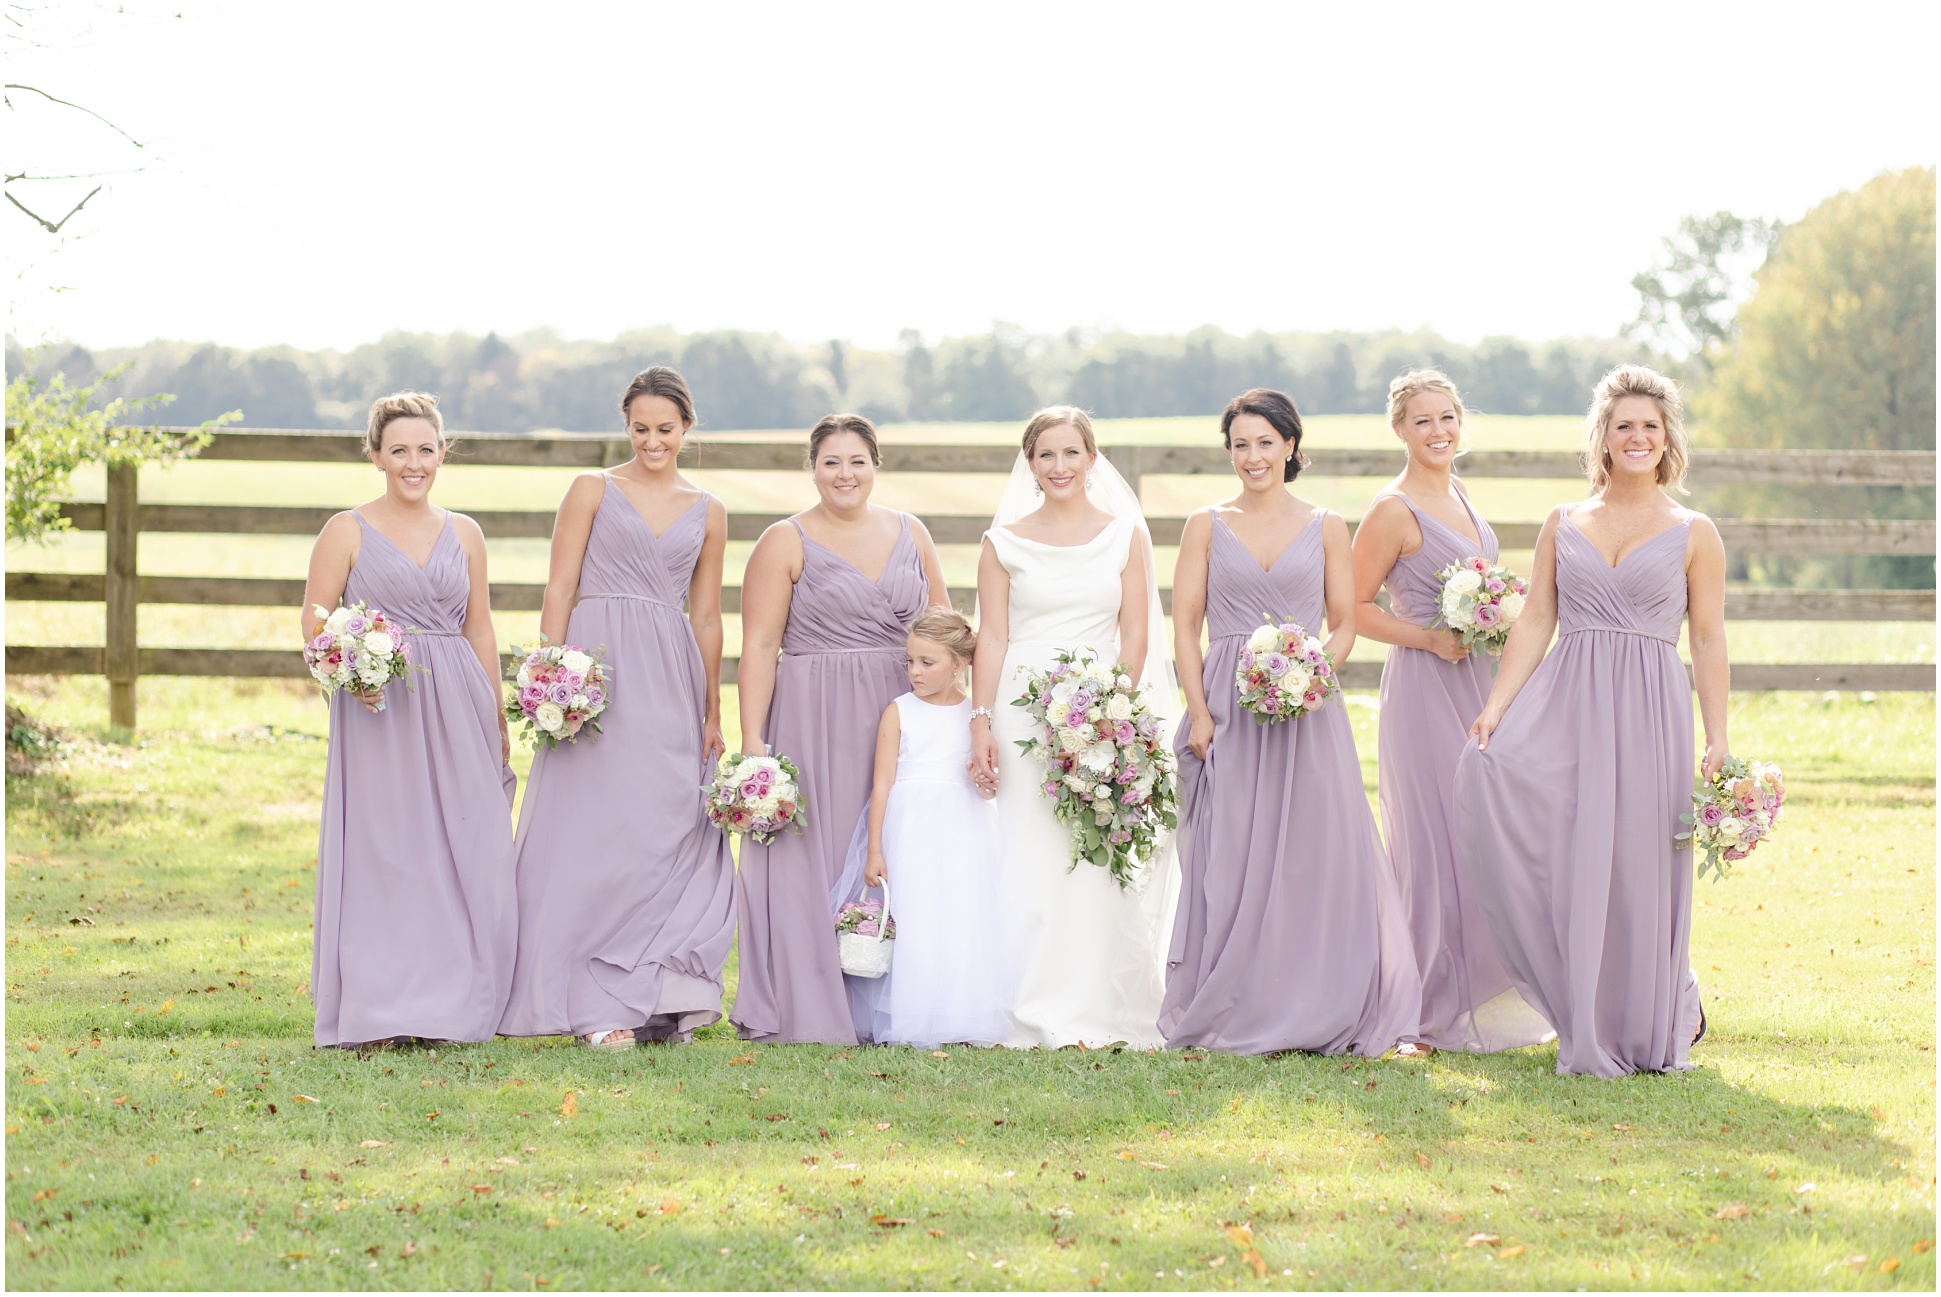 Bride and her bridal party wearing long purple dresses walking toward the camera